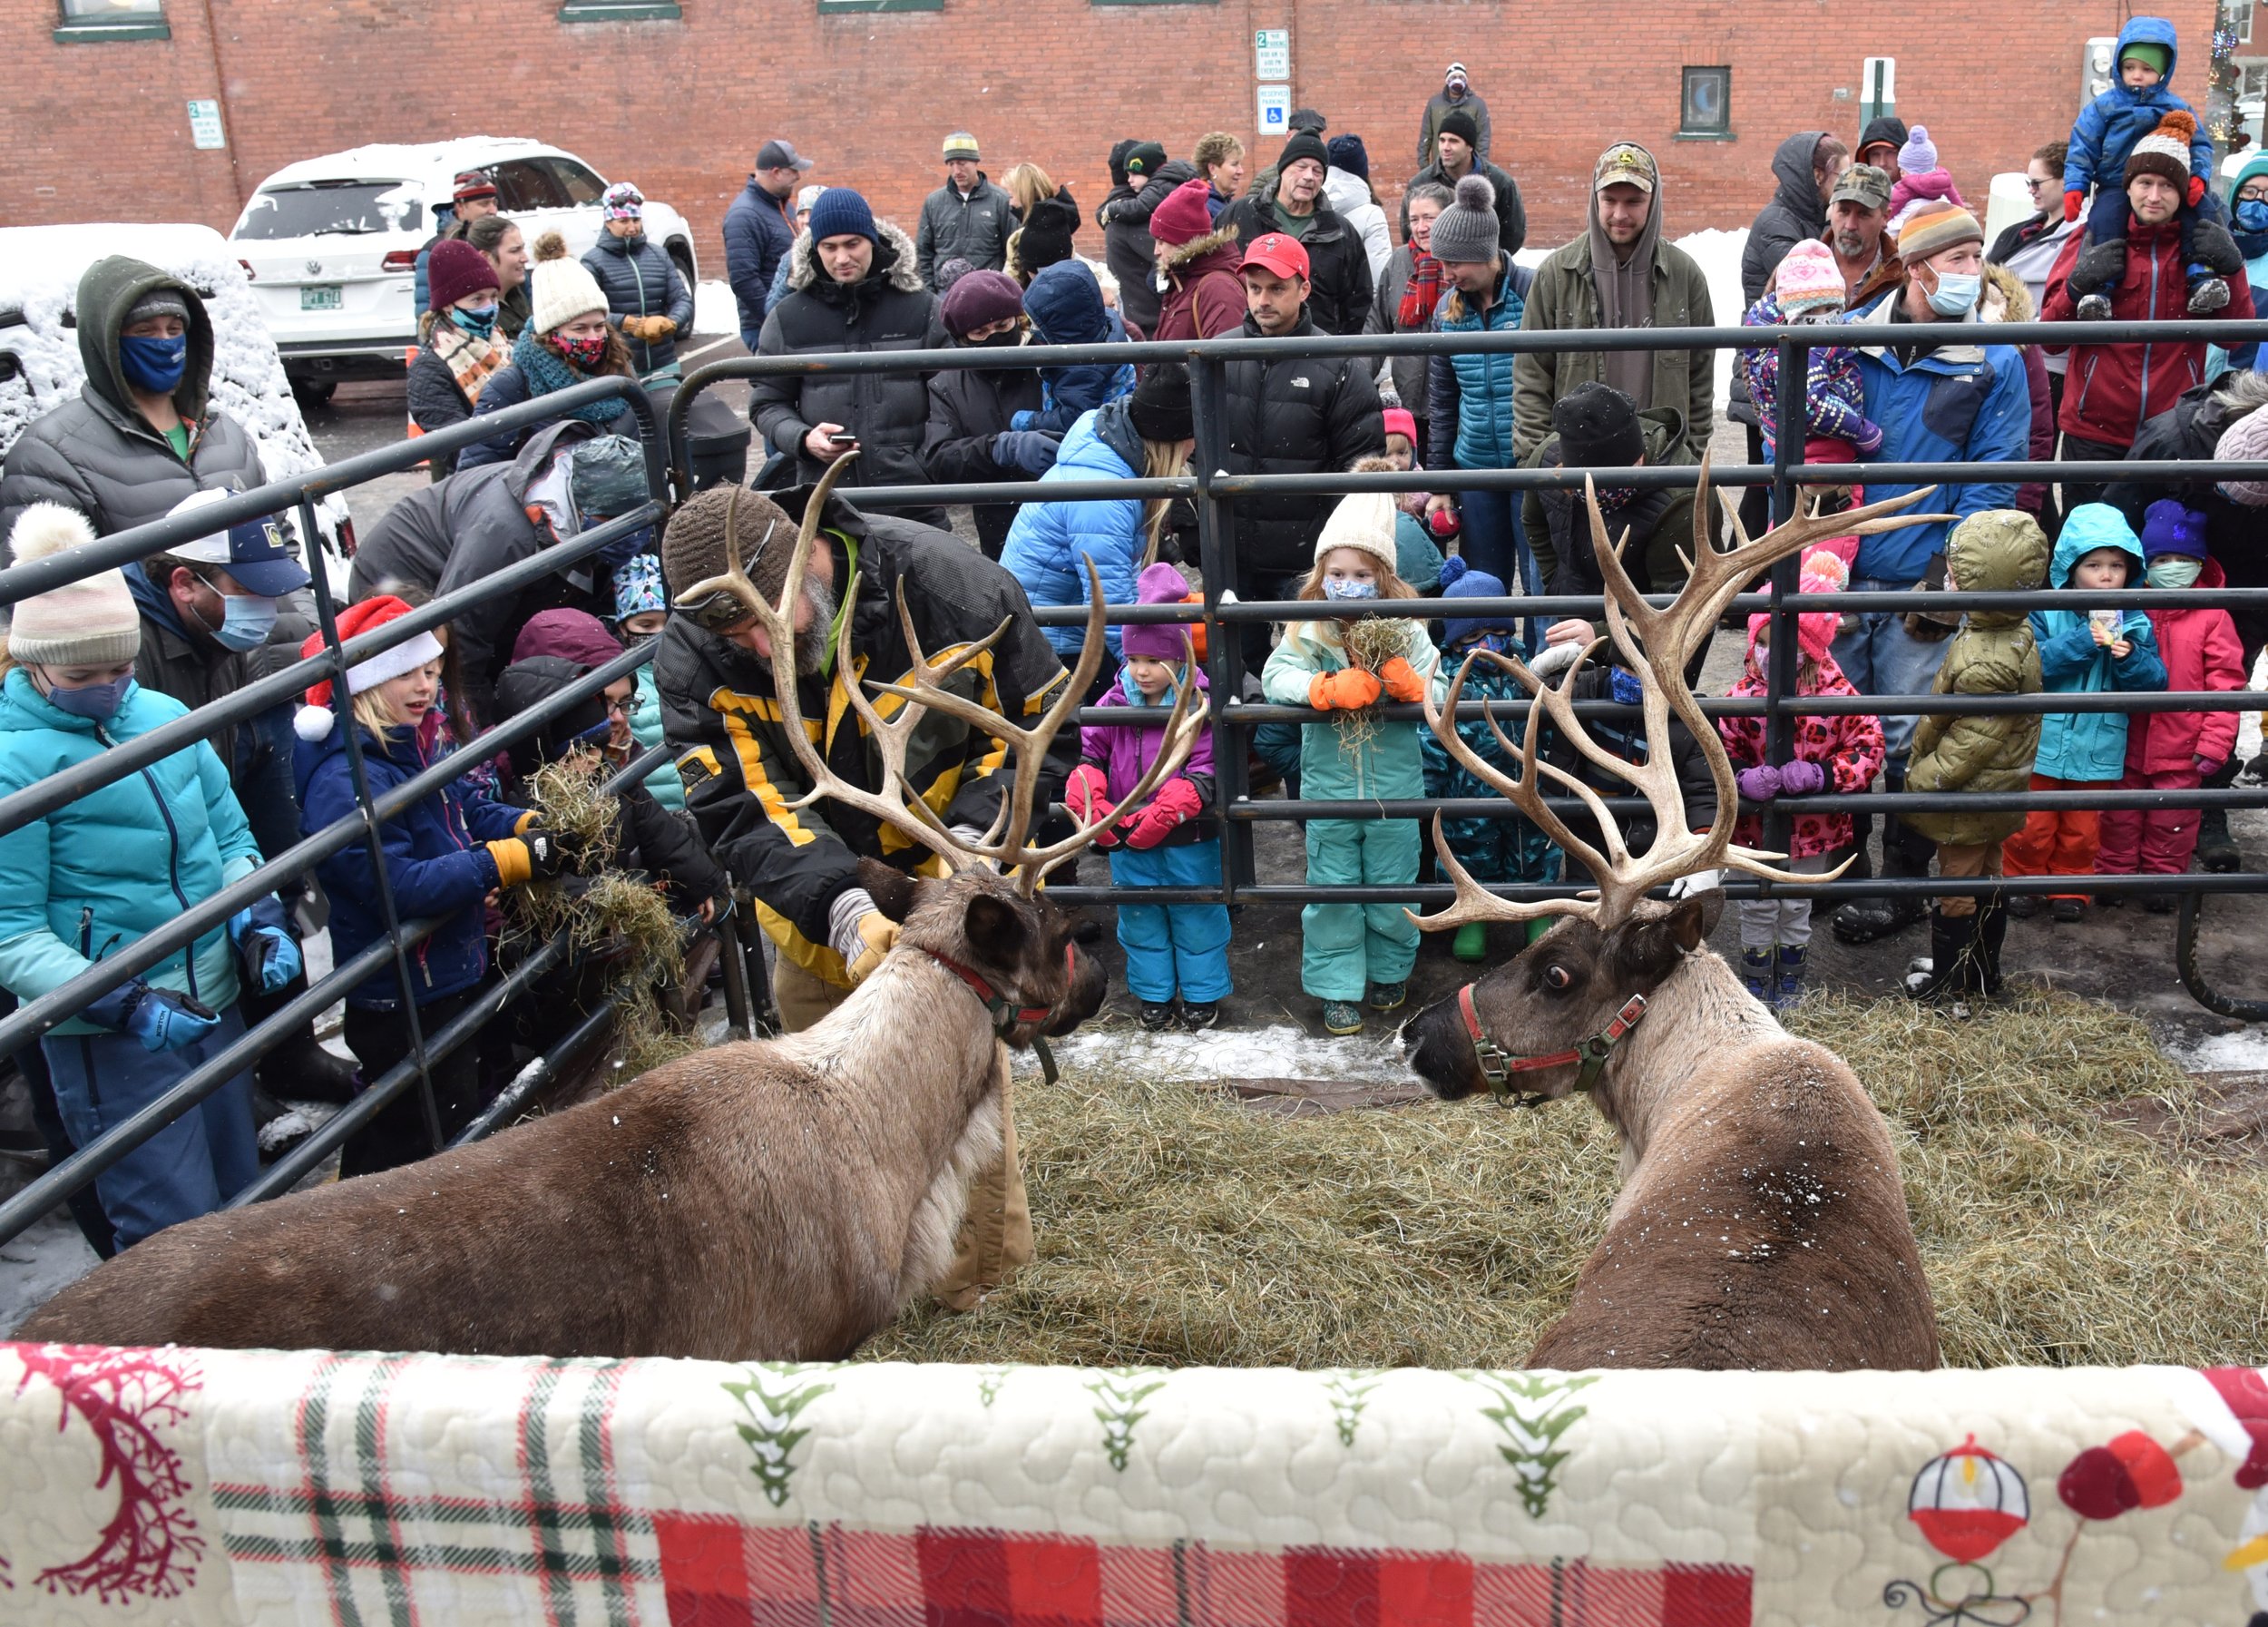  The reindeer delight holiday shoppers of all ages. Photo by Gordon Miller 